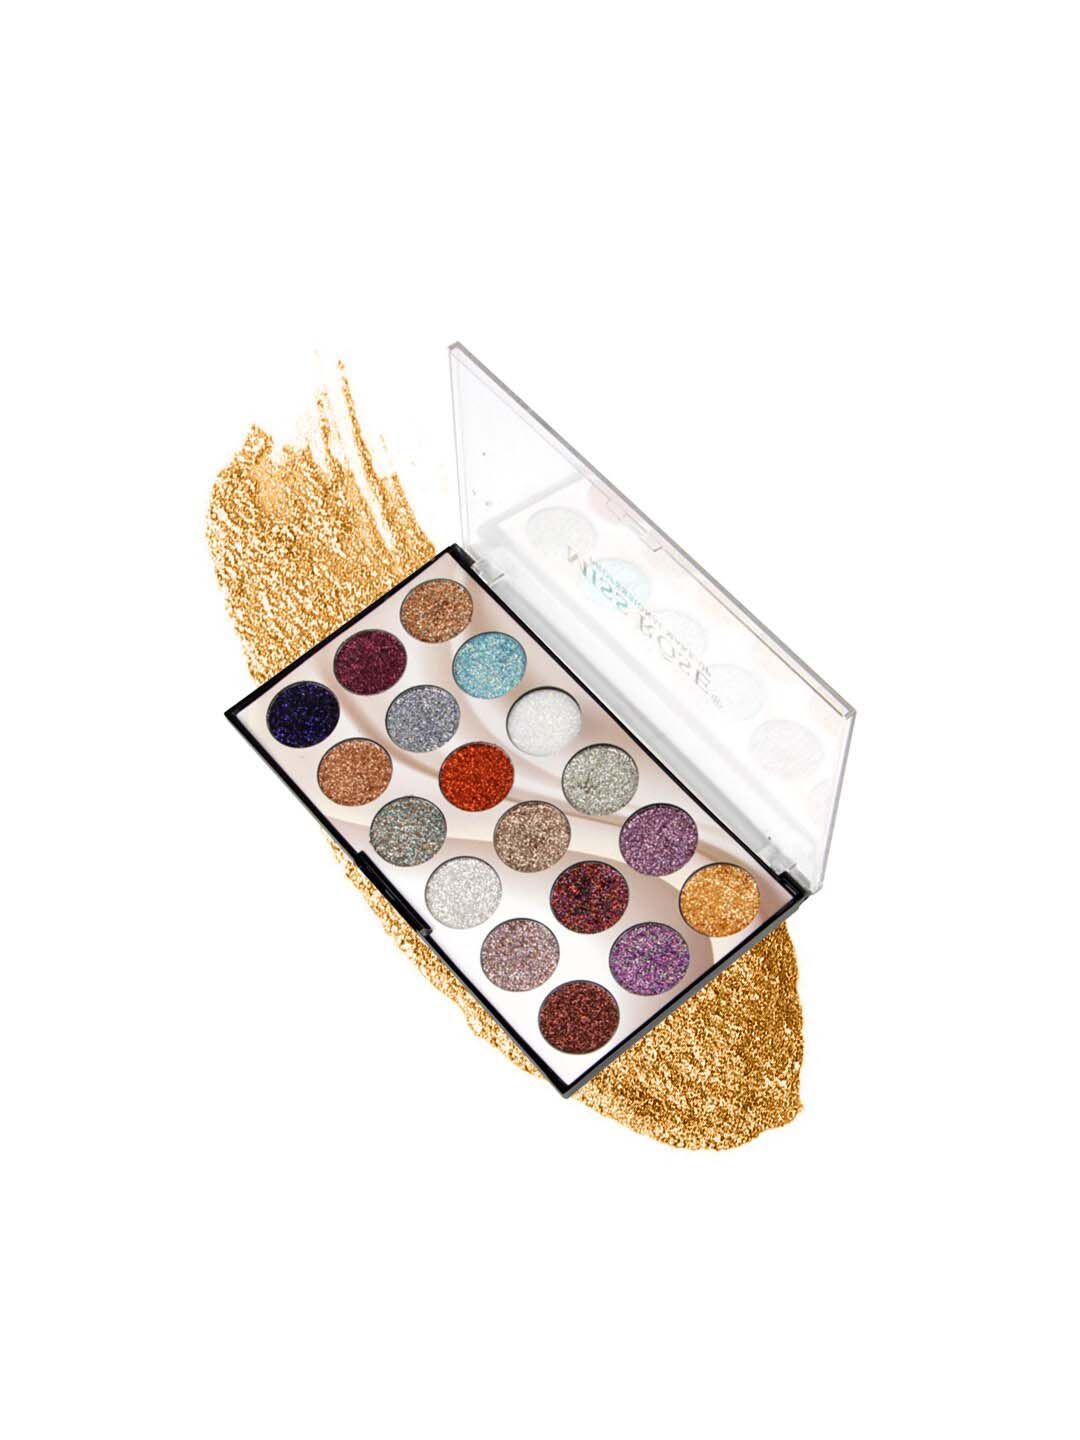 MISS ROSE 18 Color Glitter Eyeshadow Palette 7001-83 M1 Price in India